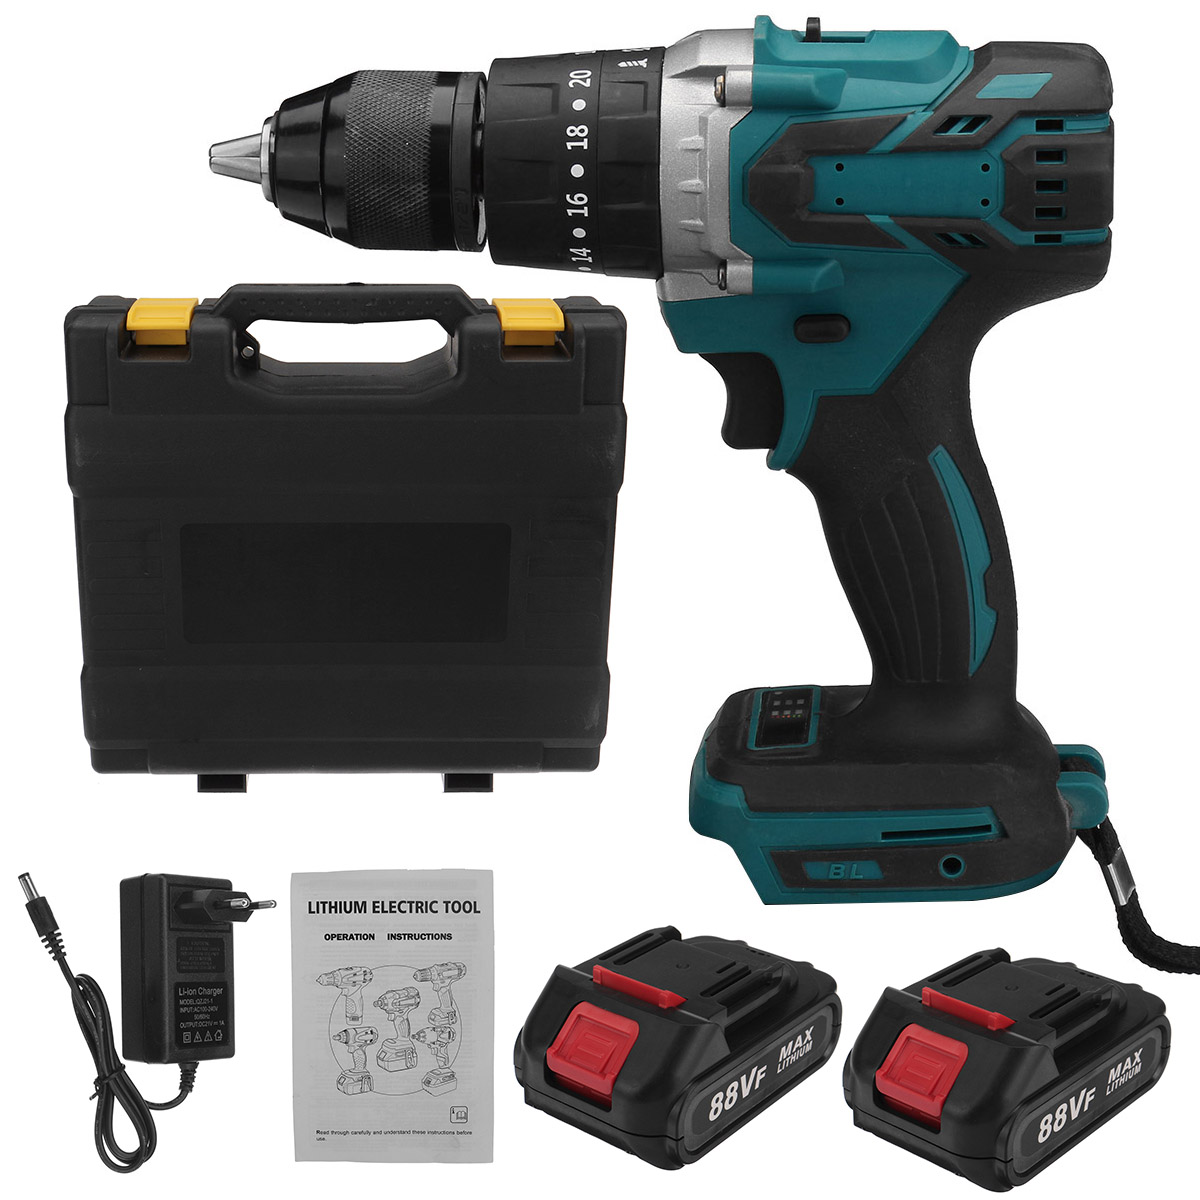 88VF-3-IN-1-Cordless-Brushless-Drill-Electric-Screwdriver-Hammer-Impact-Drill-203-Torque-W-12pcs-Bat-1854945-5